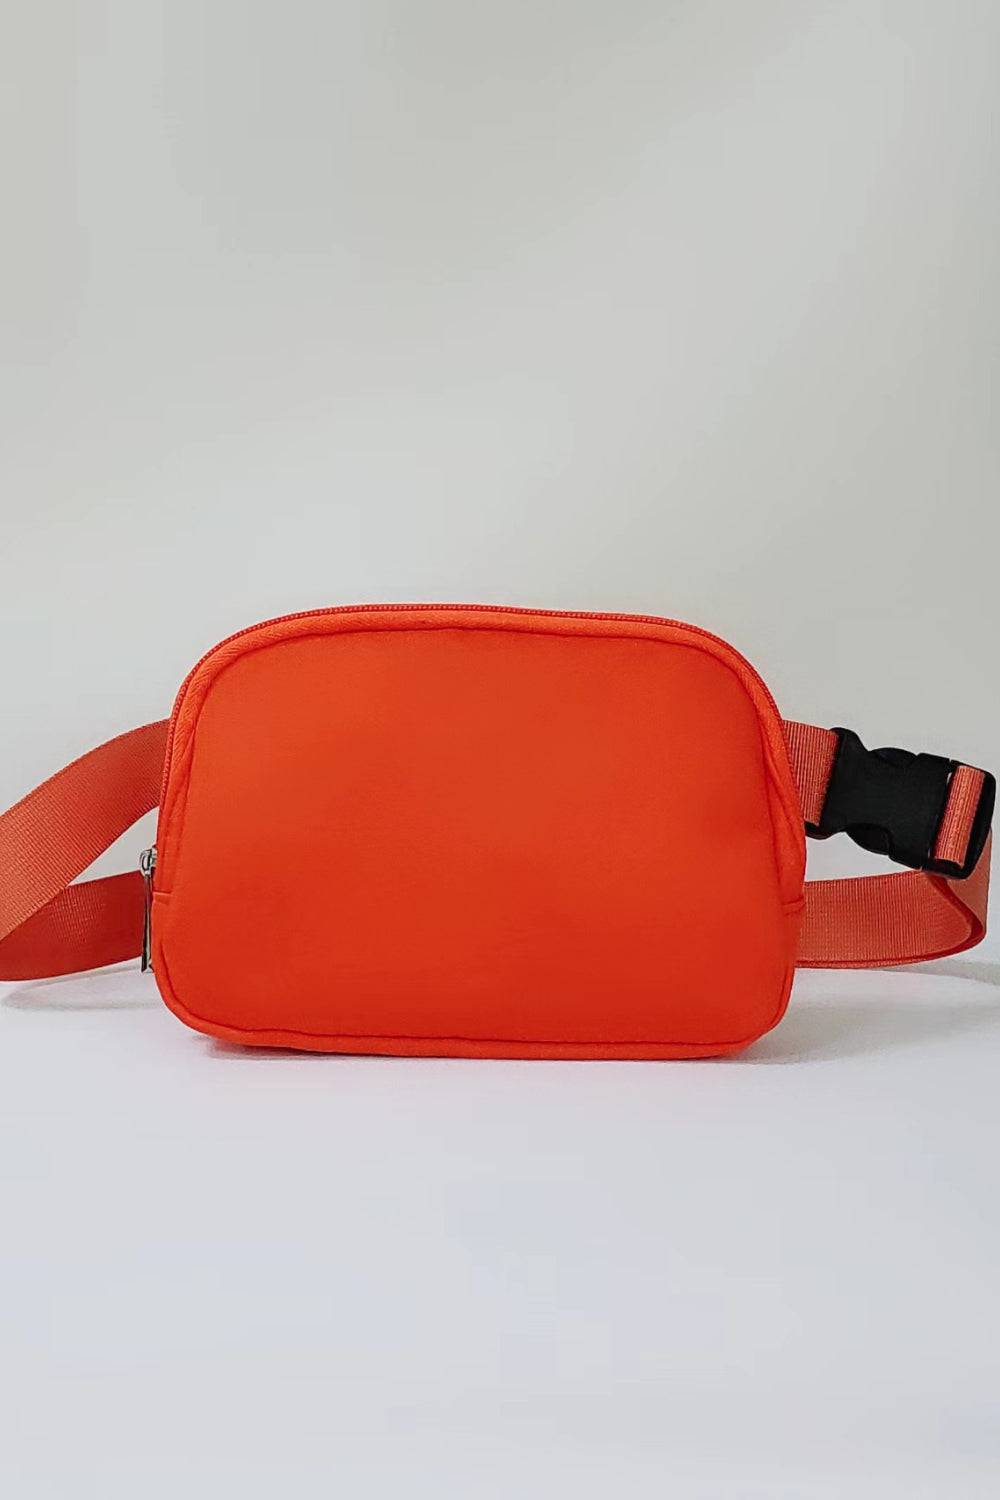 Heart's Desire Fanny Pack - Embrace your Hip and Capture your Heart - Travel with Elegance, Comfort and Security - Guy Christopher